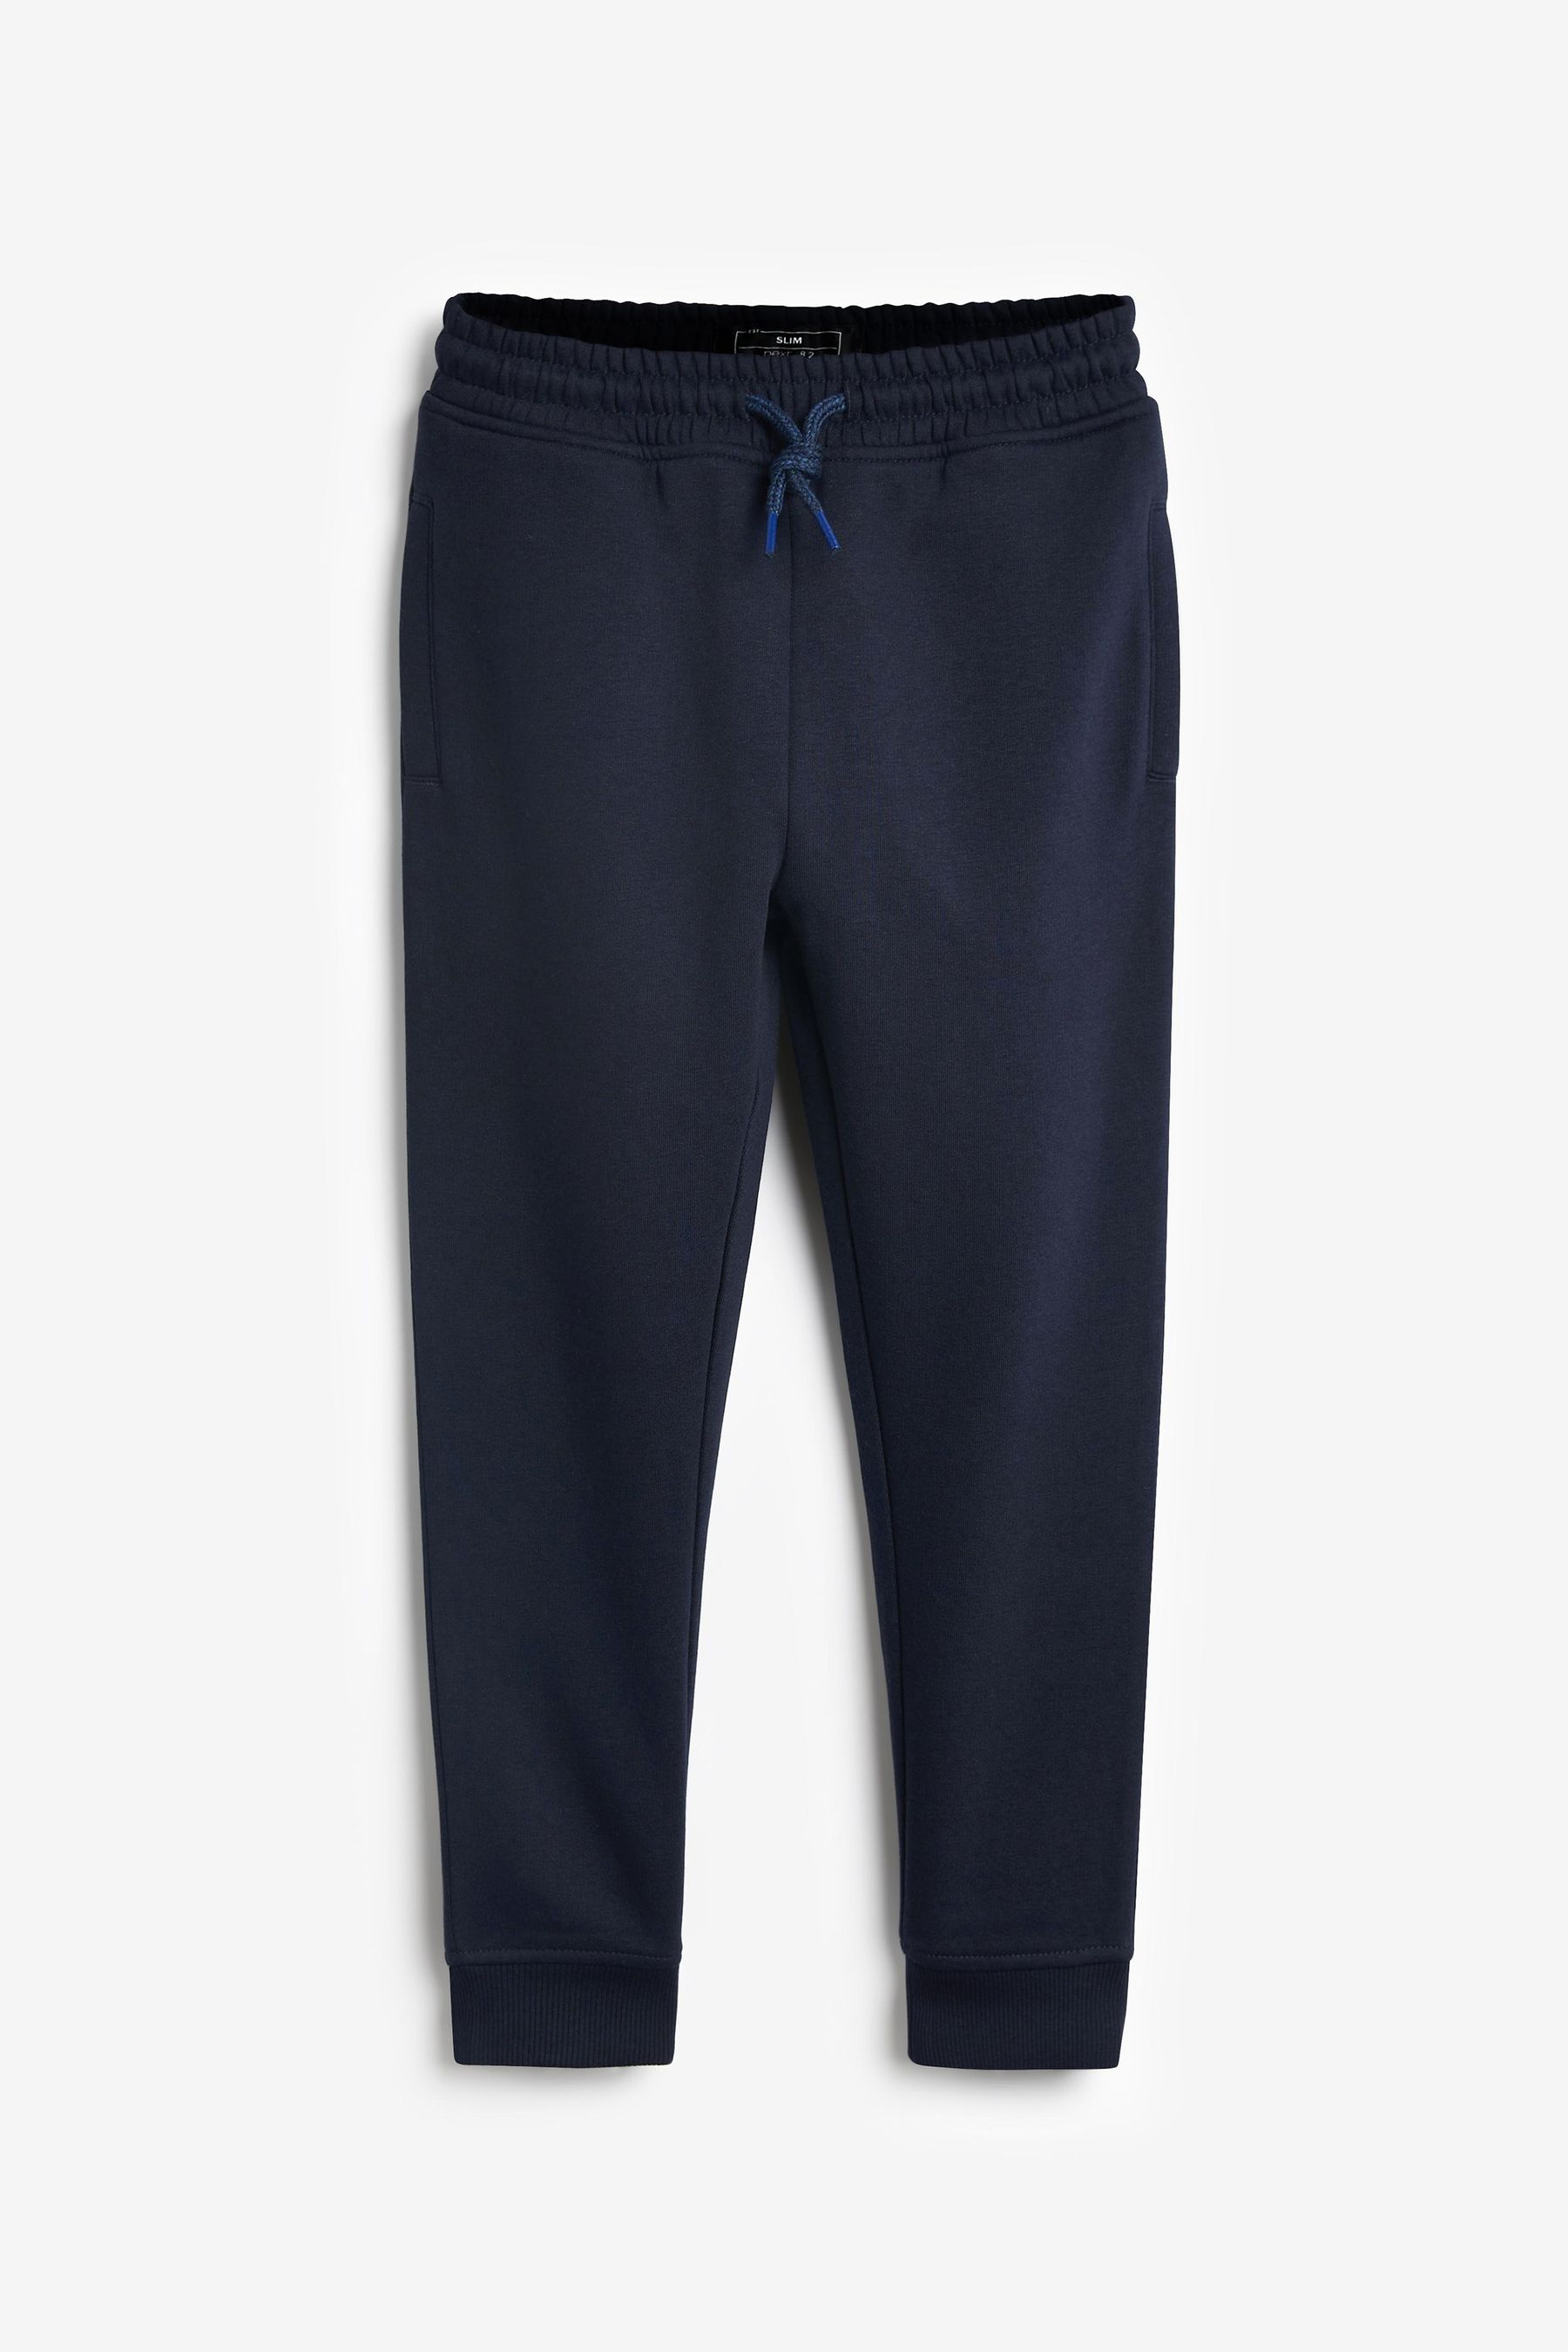 Buy Multi Slim Fit Joggers 5 Pack (3-16yrs) from the Next UK online shop